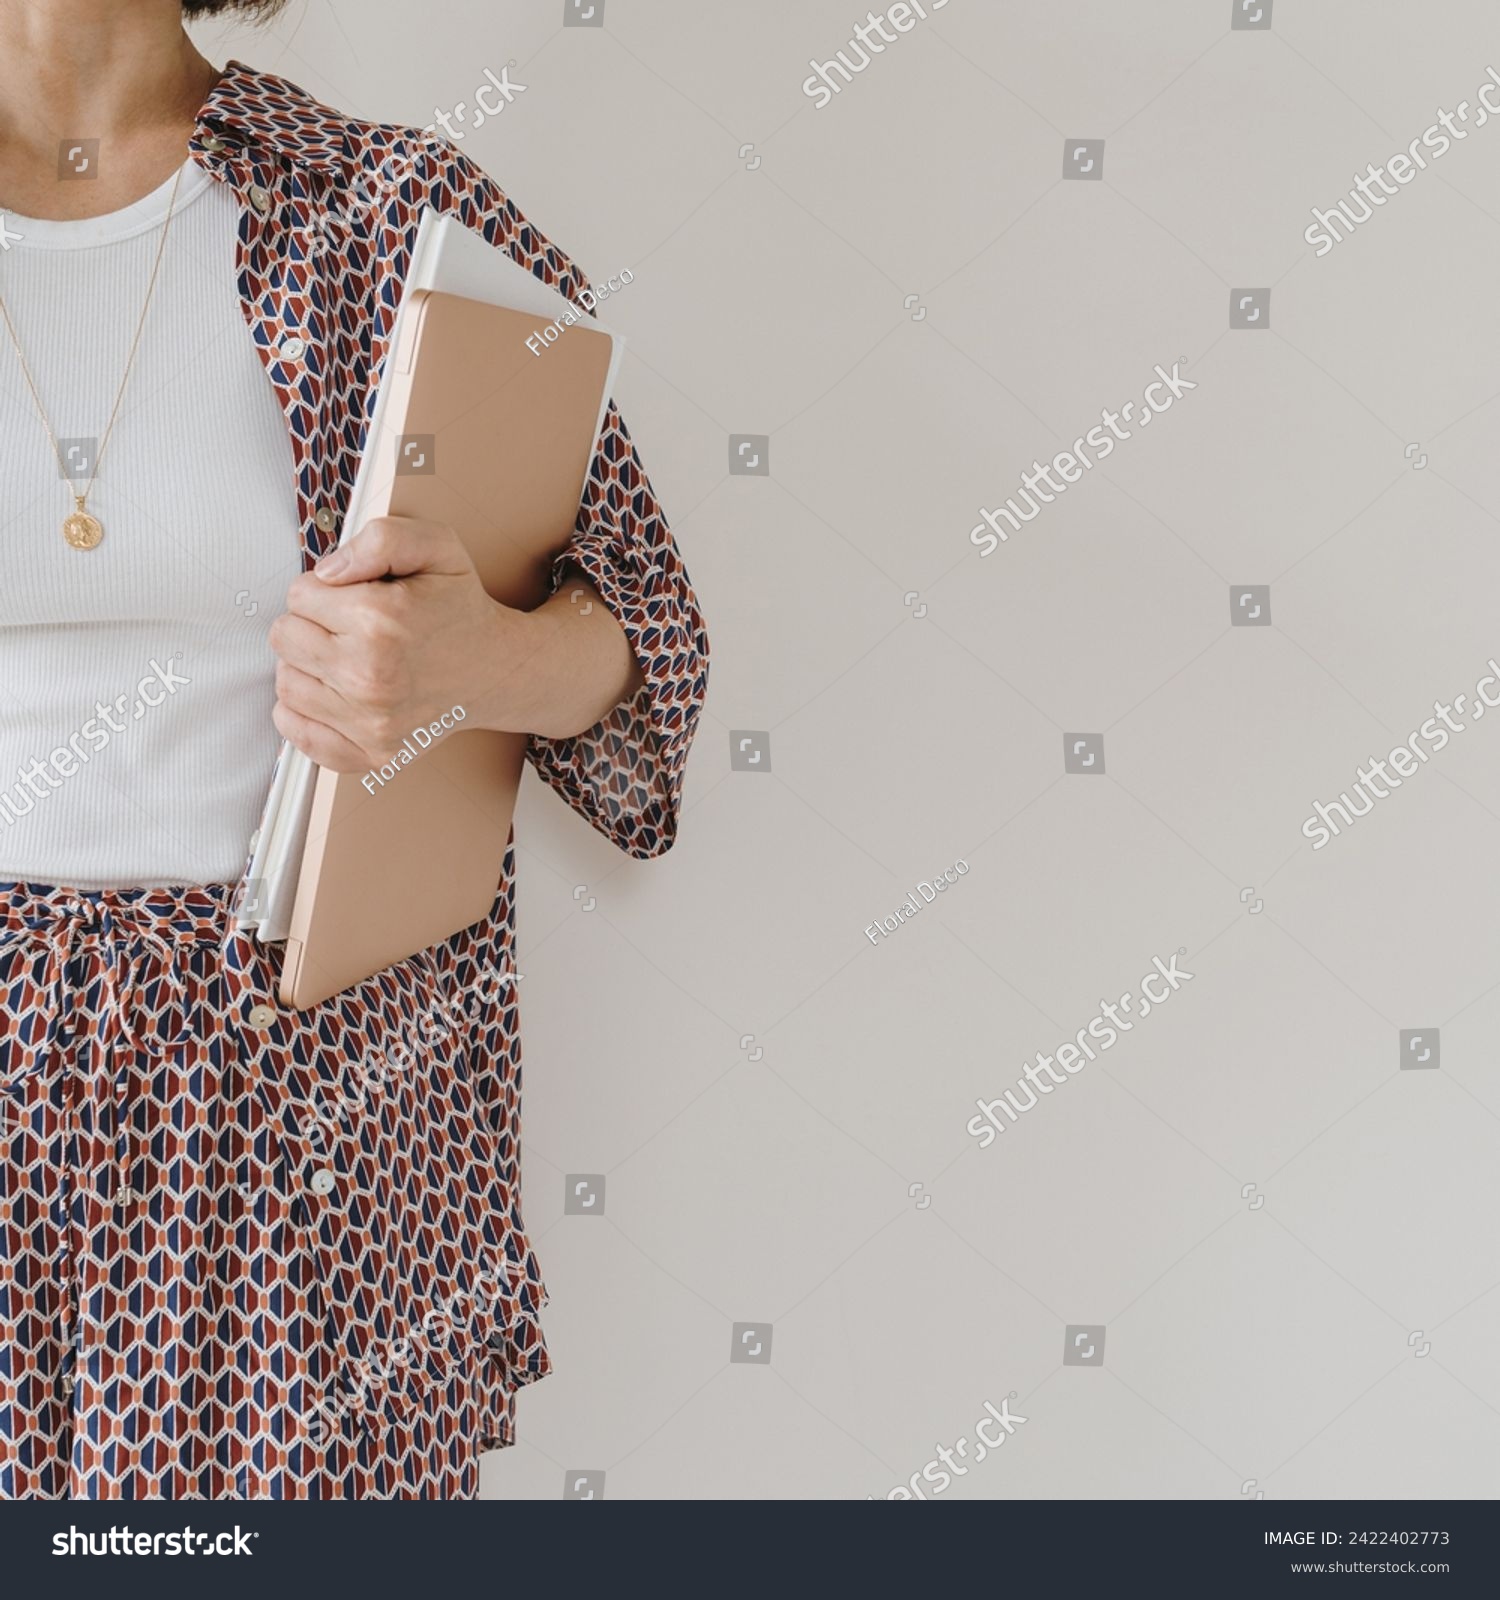 Laptop computer and paper documents in female hand. Young pretty woman in pajamas stays over white wall. Businesswoman, work at home concept #2422402773